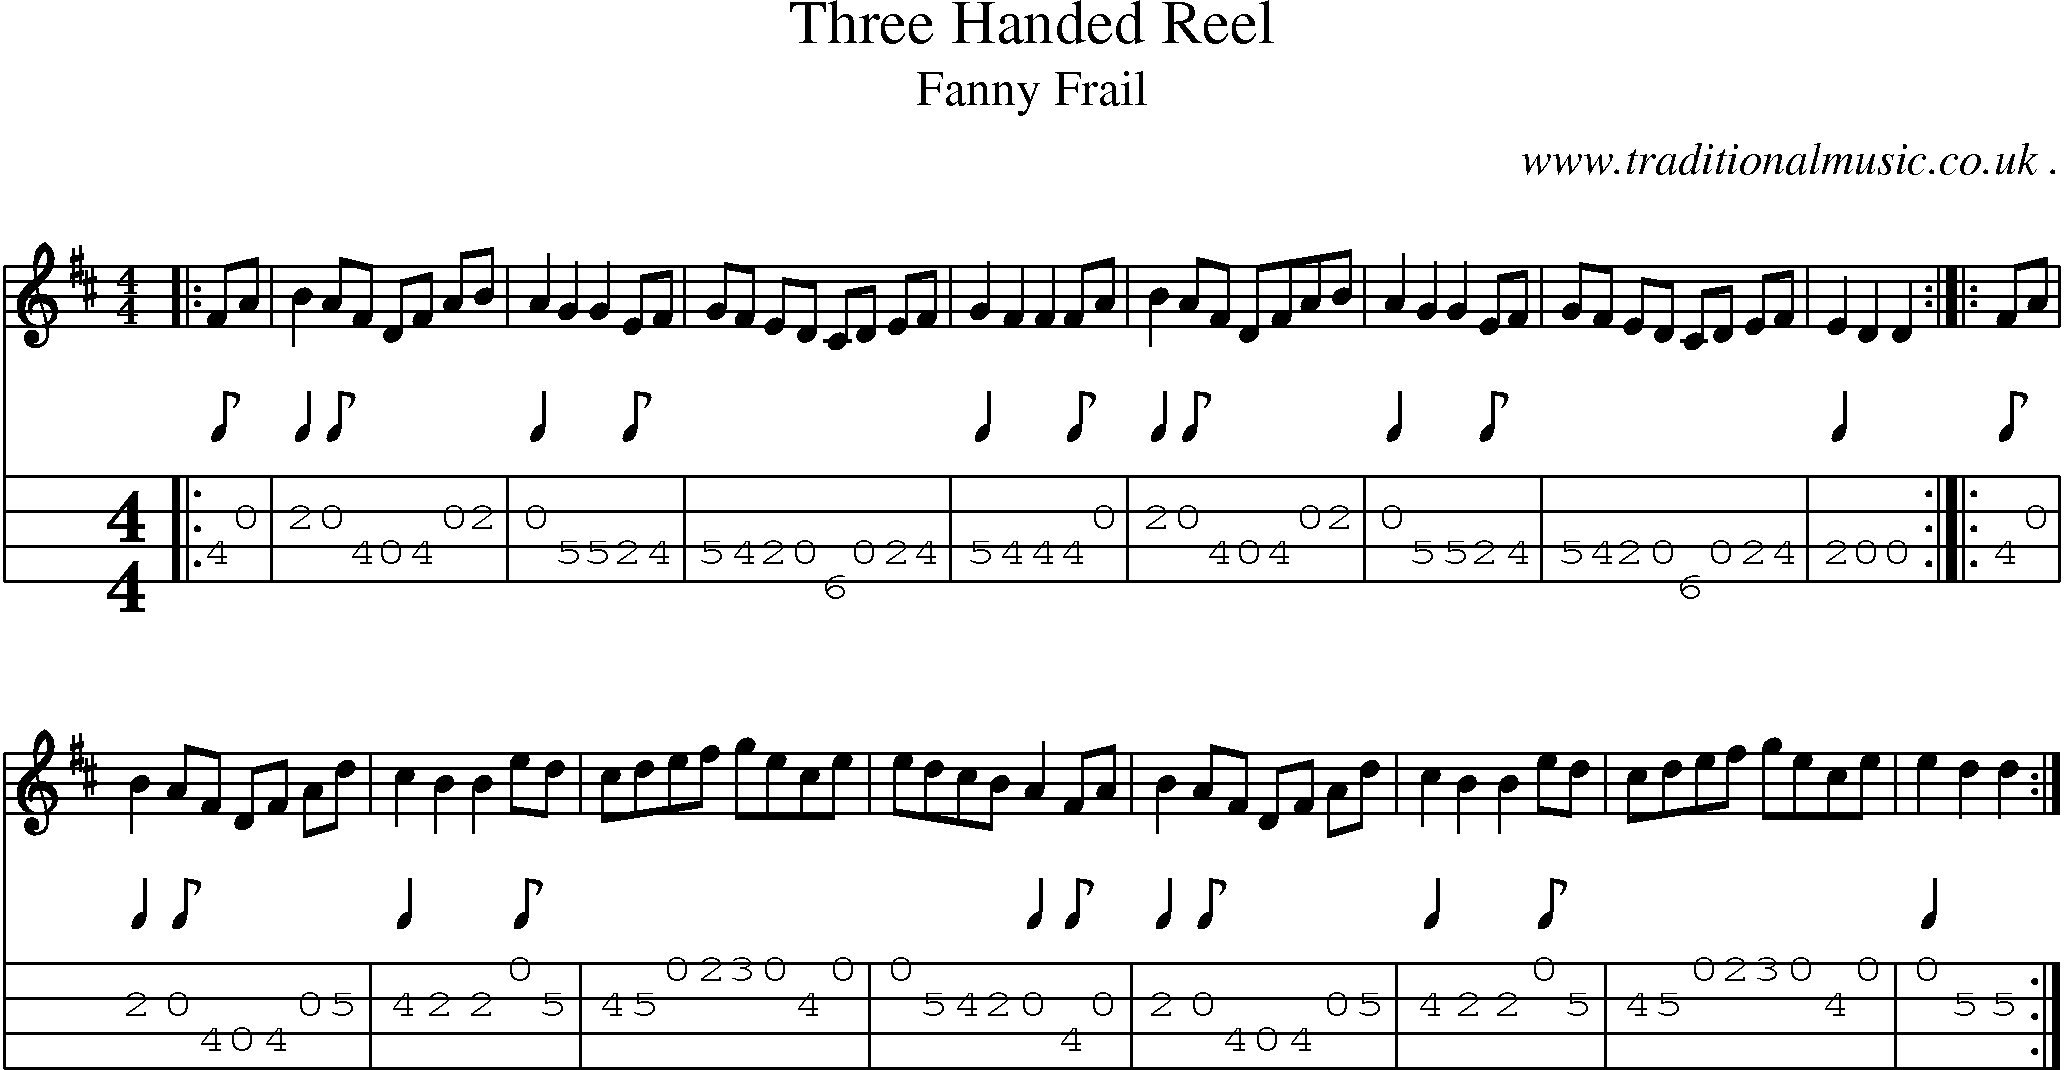 Sheet-Music and Mandolin Tabs for Three Handed Reel